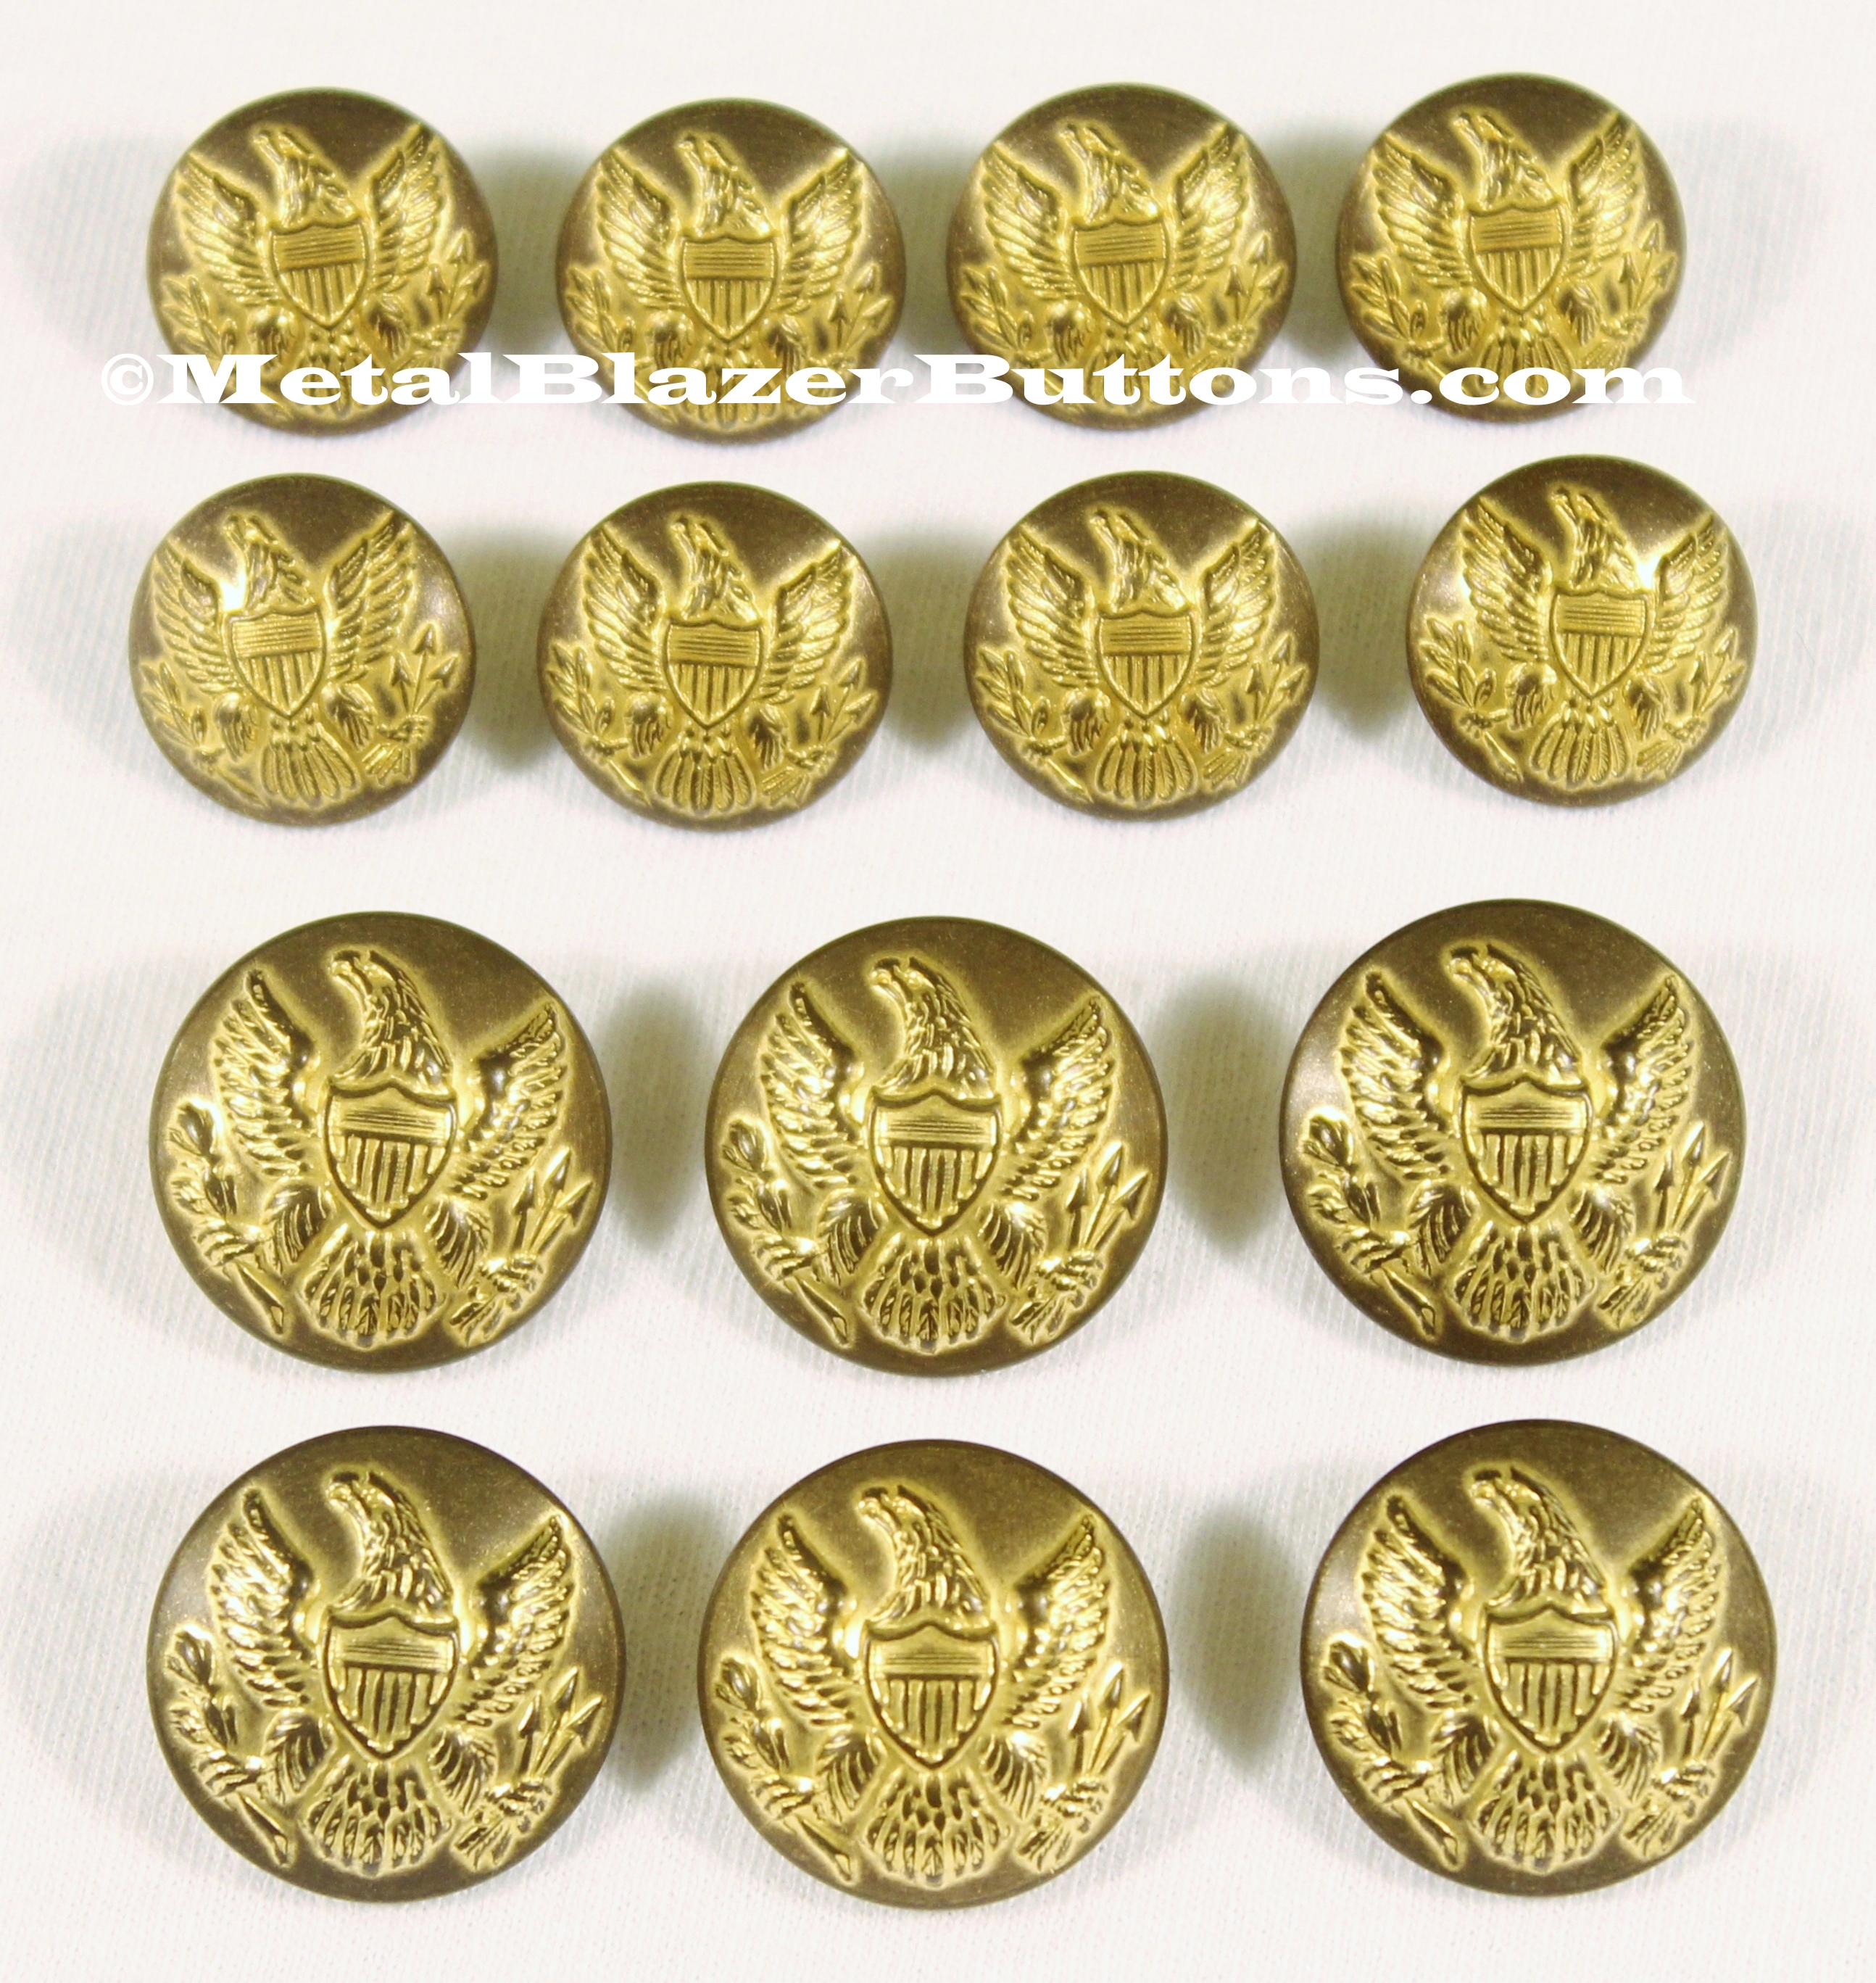 ***VINTAGE GOLD***
AMERICAN CIVIL WAR 
UNION ARMY EAGLE 
14-PIECE DOUBLE  BREASTED
METAL BLAZER BUTTON SET